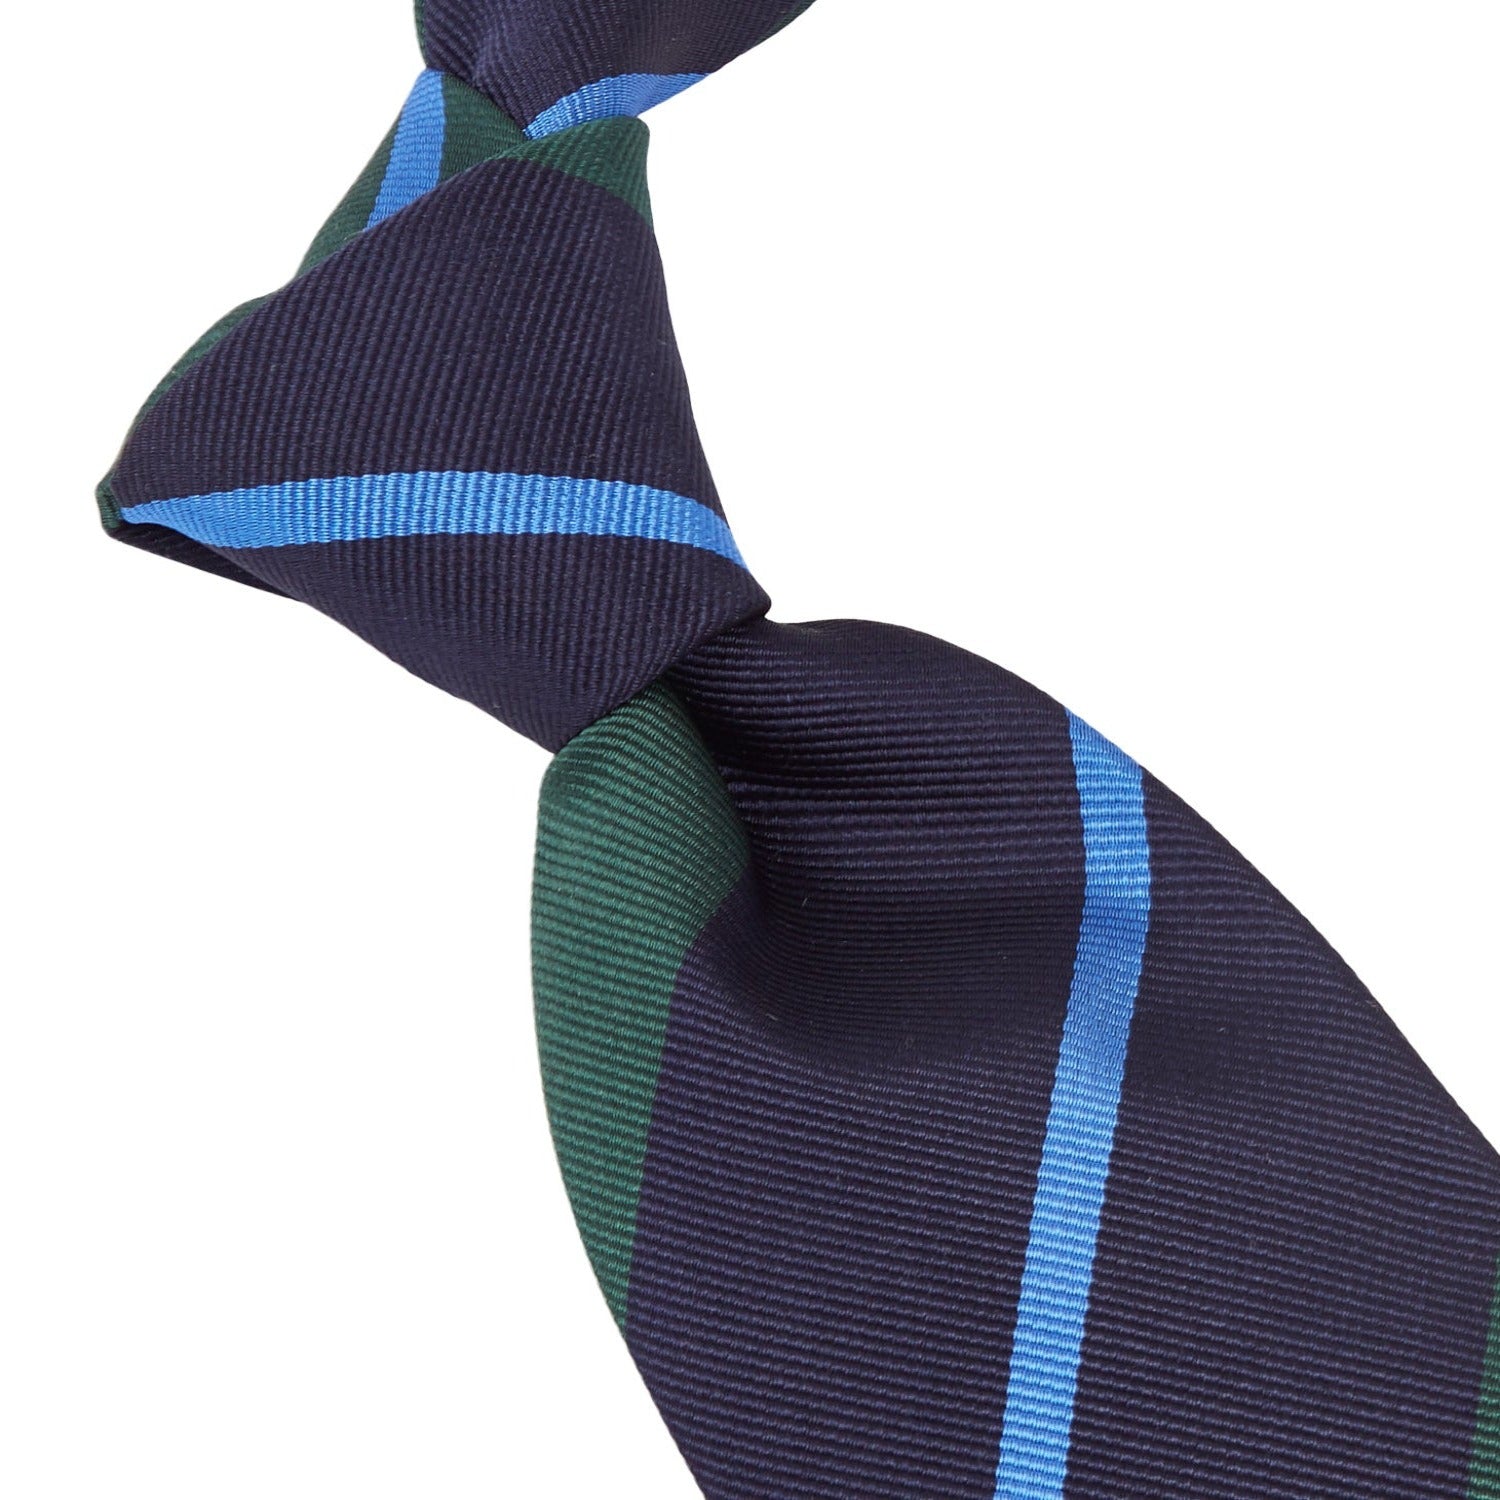 A KirbyAllison.com Sovereign Grade Navy/Green Rep Tie with blue and green stripes on a white background.